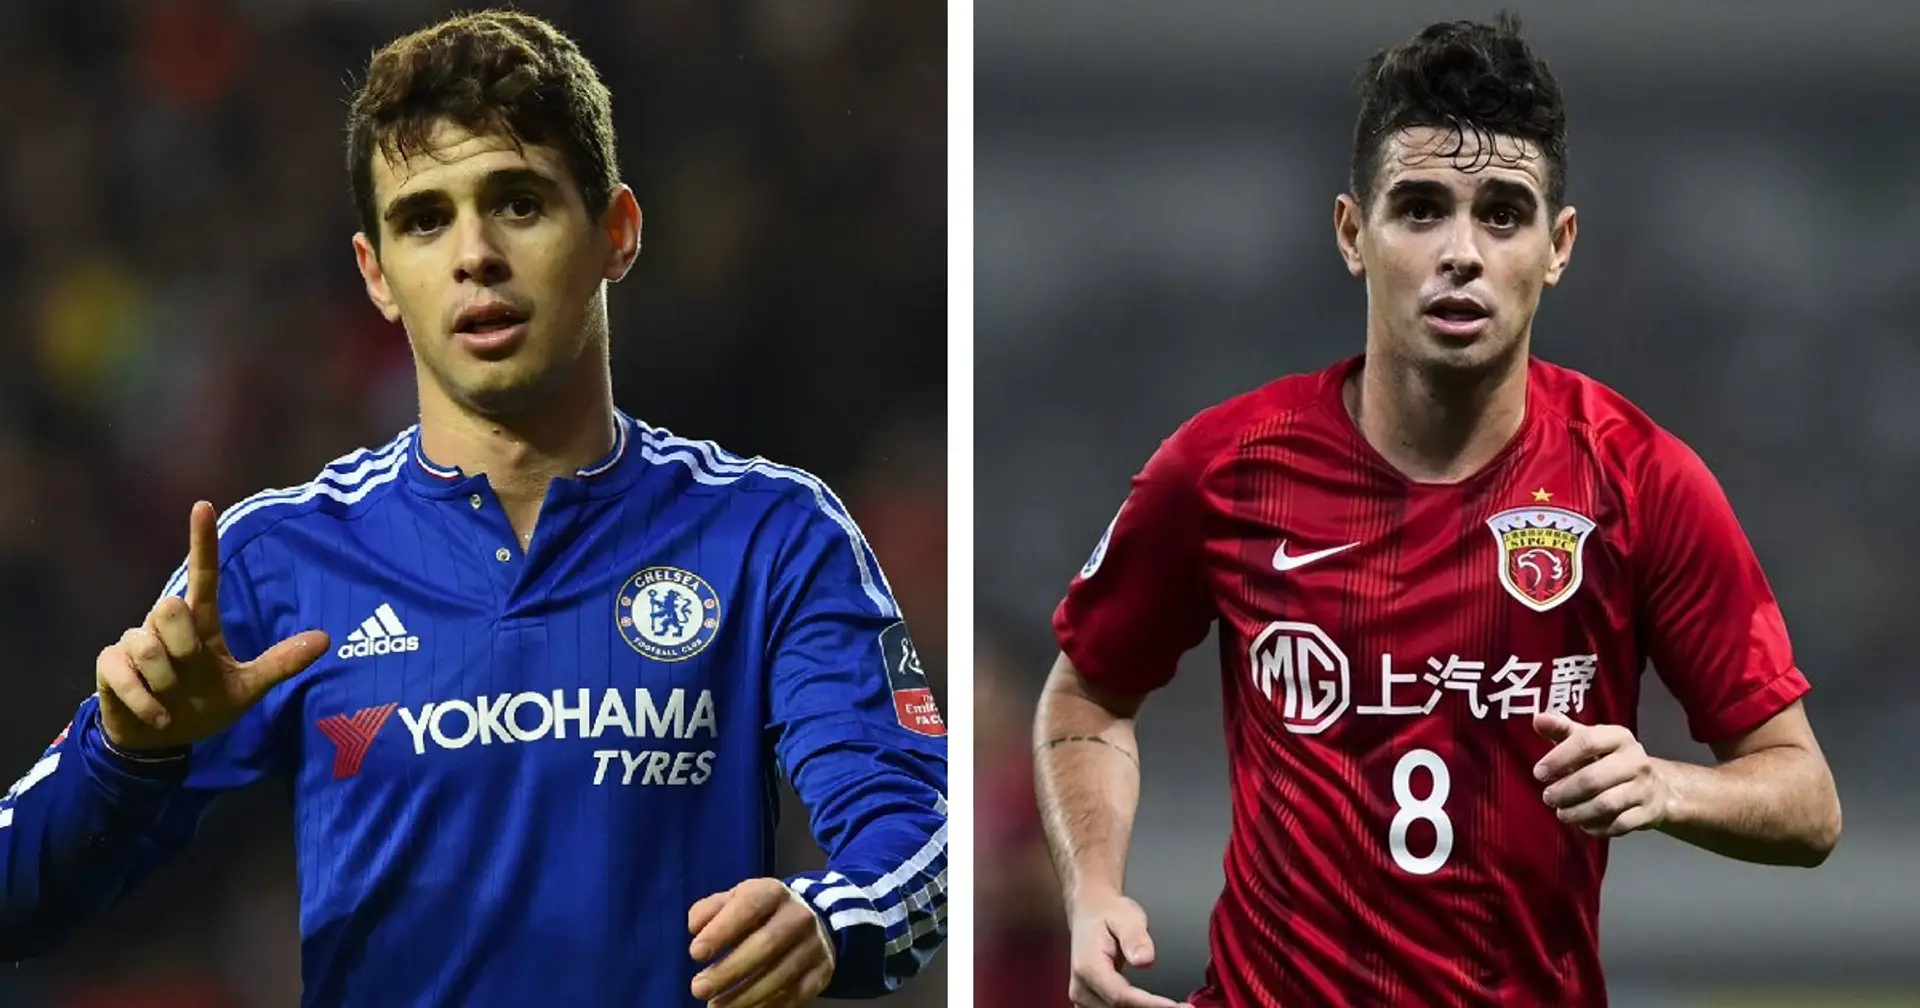 Former Chelsea star Oscar set to move from Shanghai to Flamengo